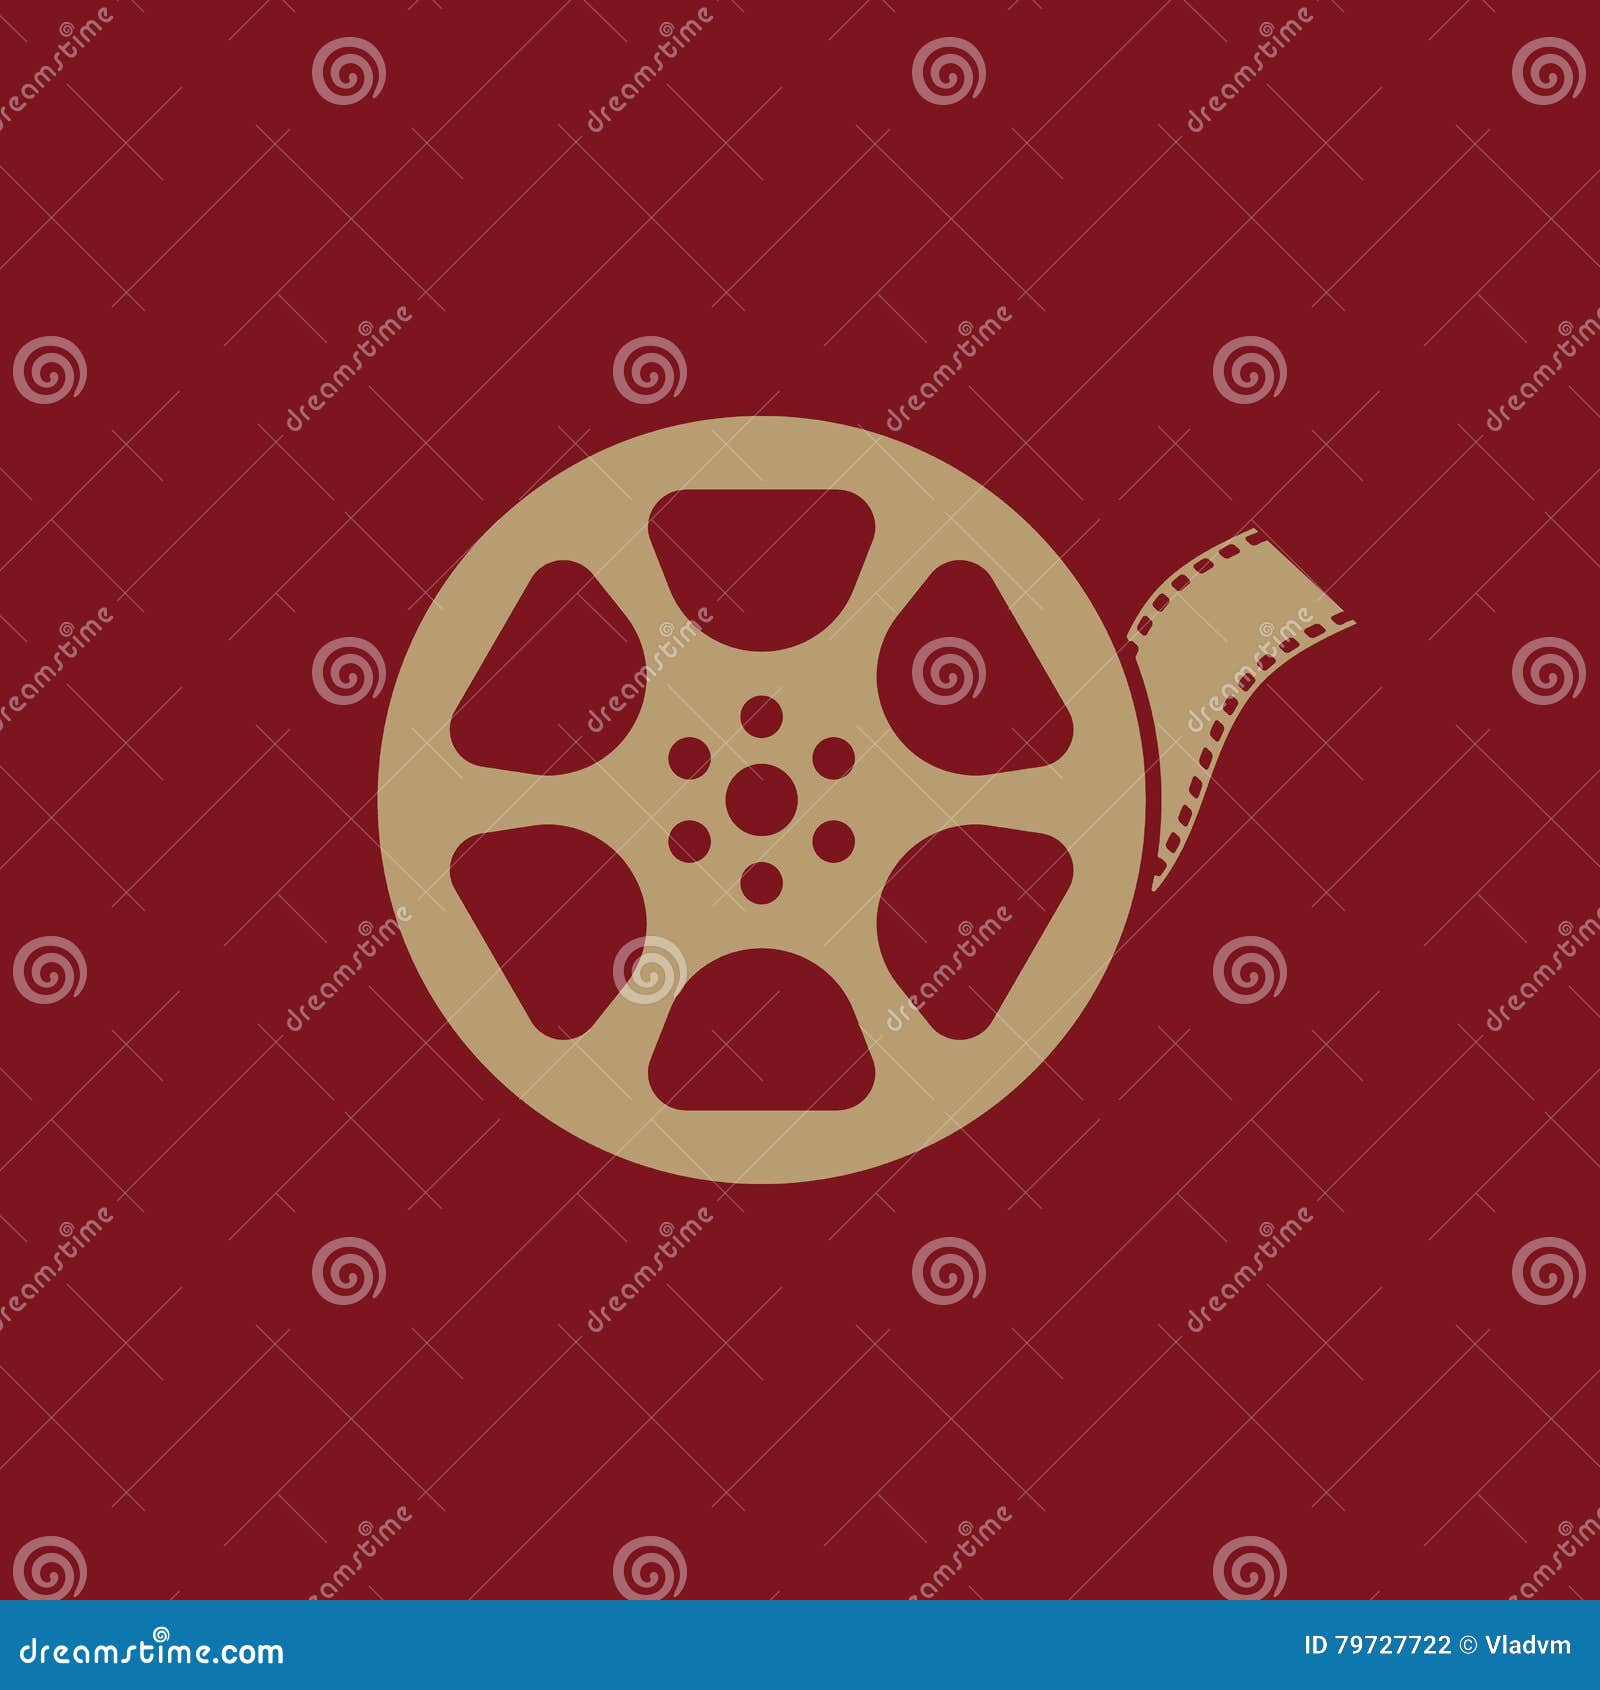 The Video Icon. Movie Symbol Stock Vector - Illustration of abstract ...